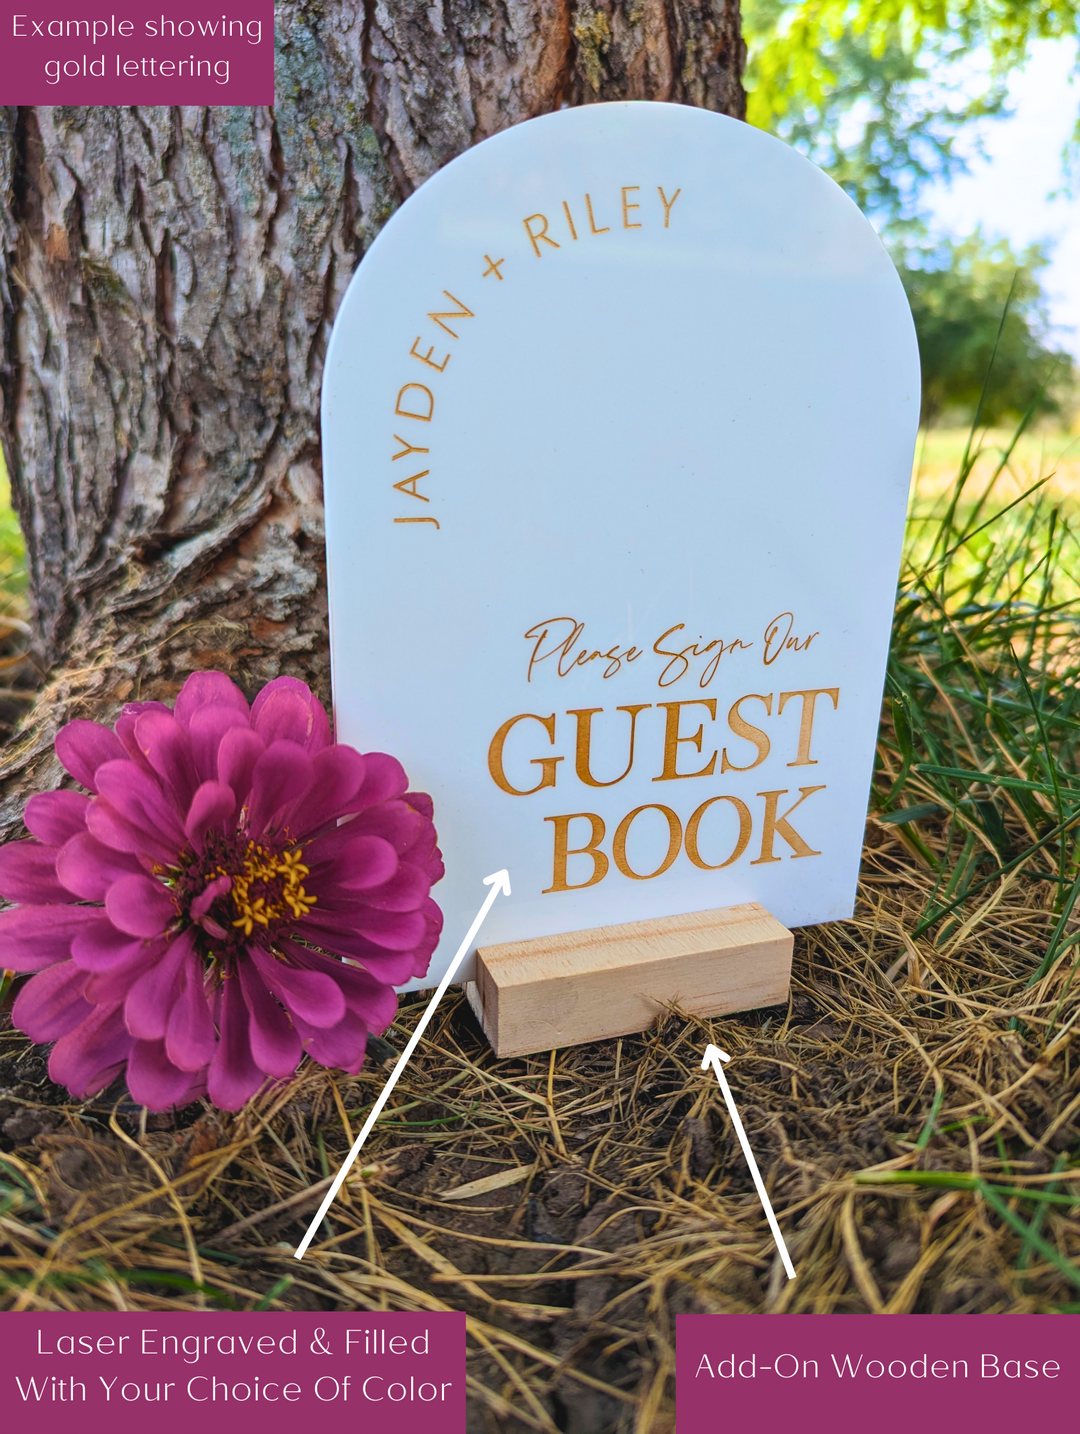 Personalized Please Sign Our Guestbook Sign Modern Acrylic Guestbook Sign, Guestbook Table Sign, Wedding Table Top Sign, Sign Guestbook Arch